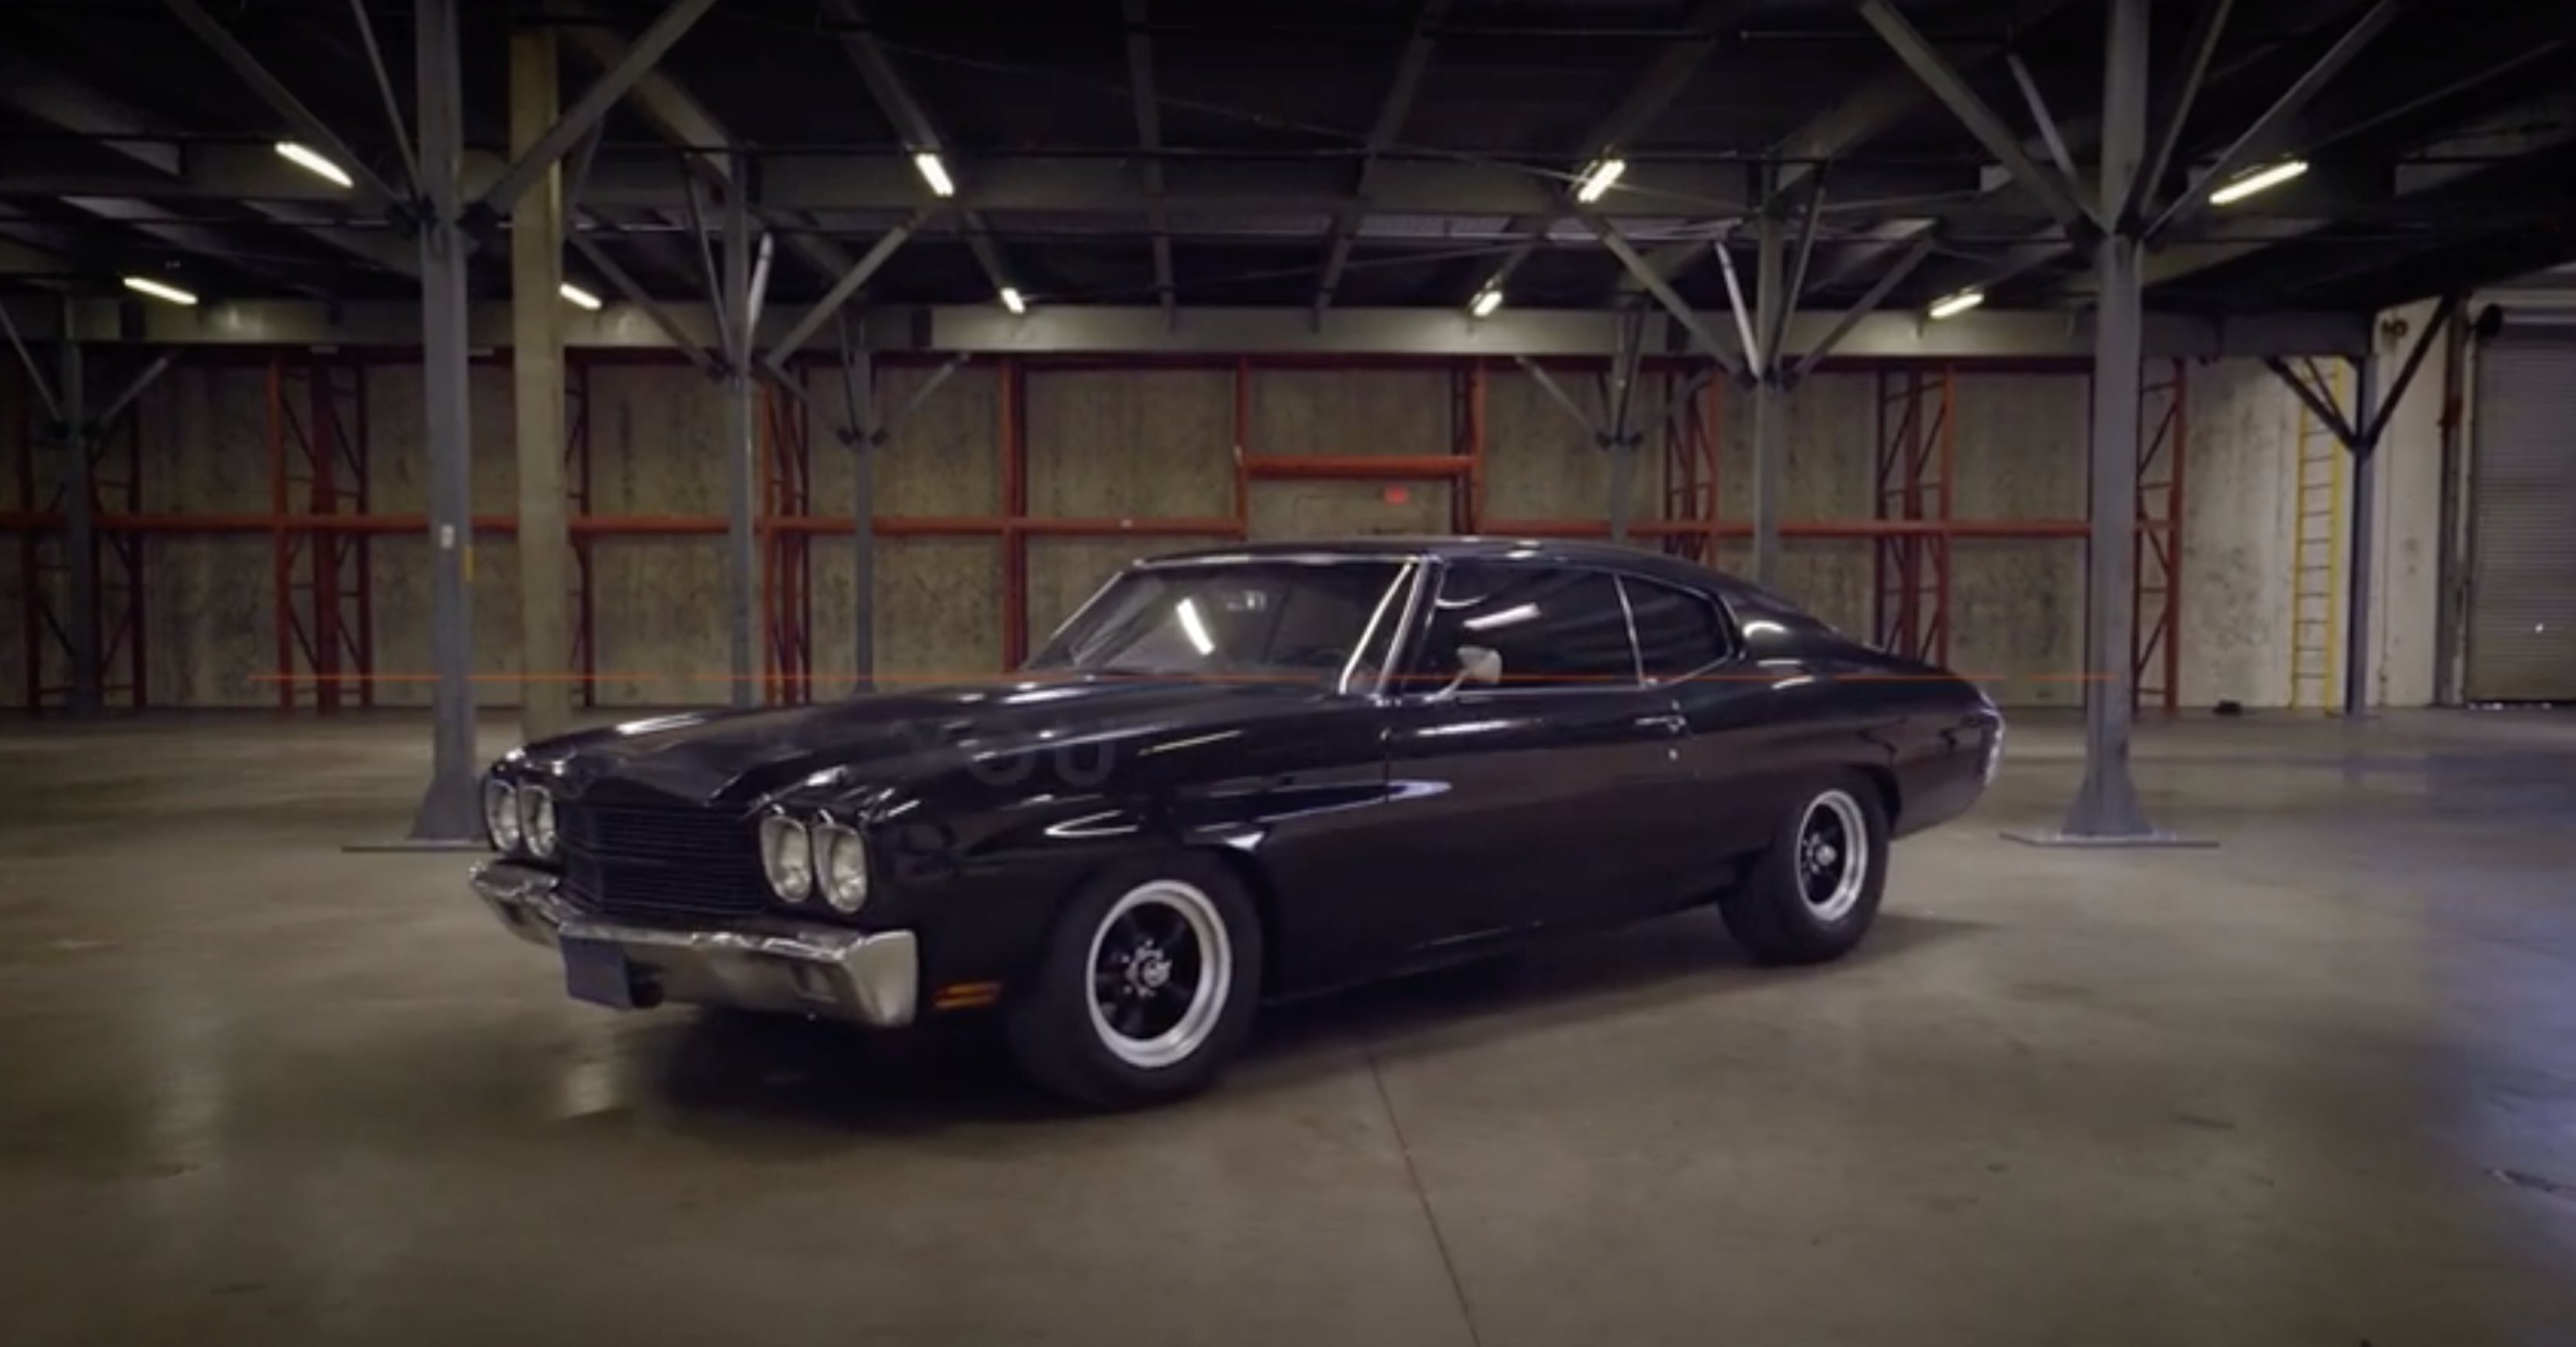 How To Add Black-Out Brakes to a 1970 Chevy Chevelle